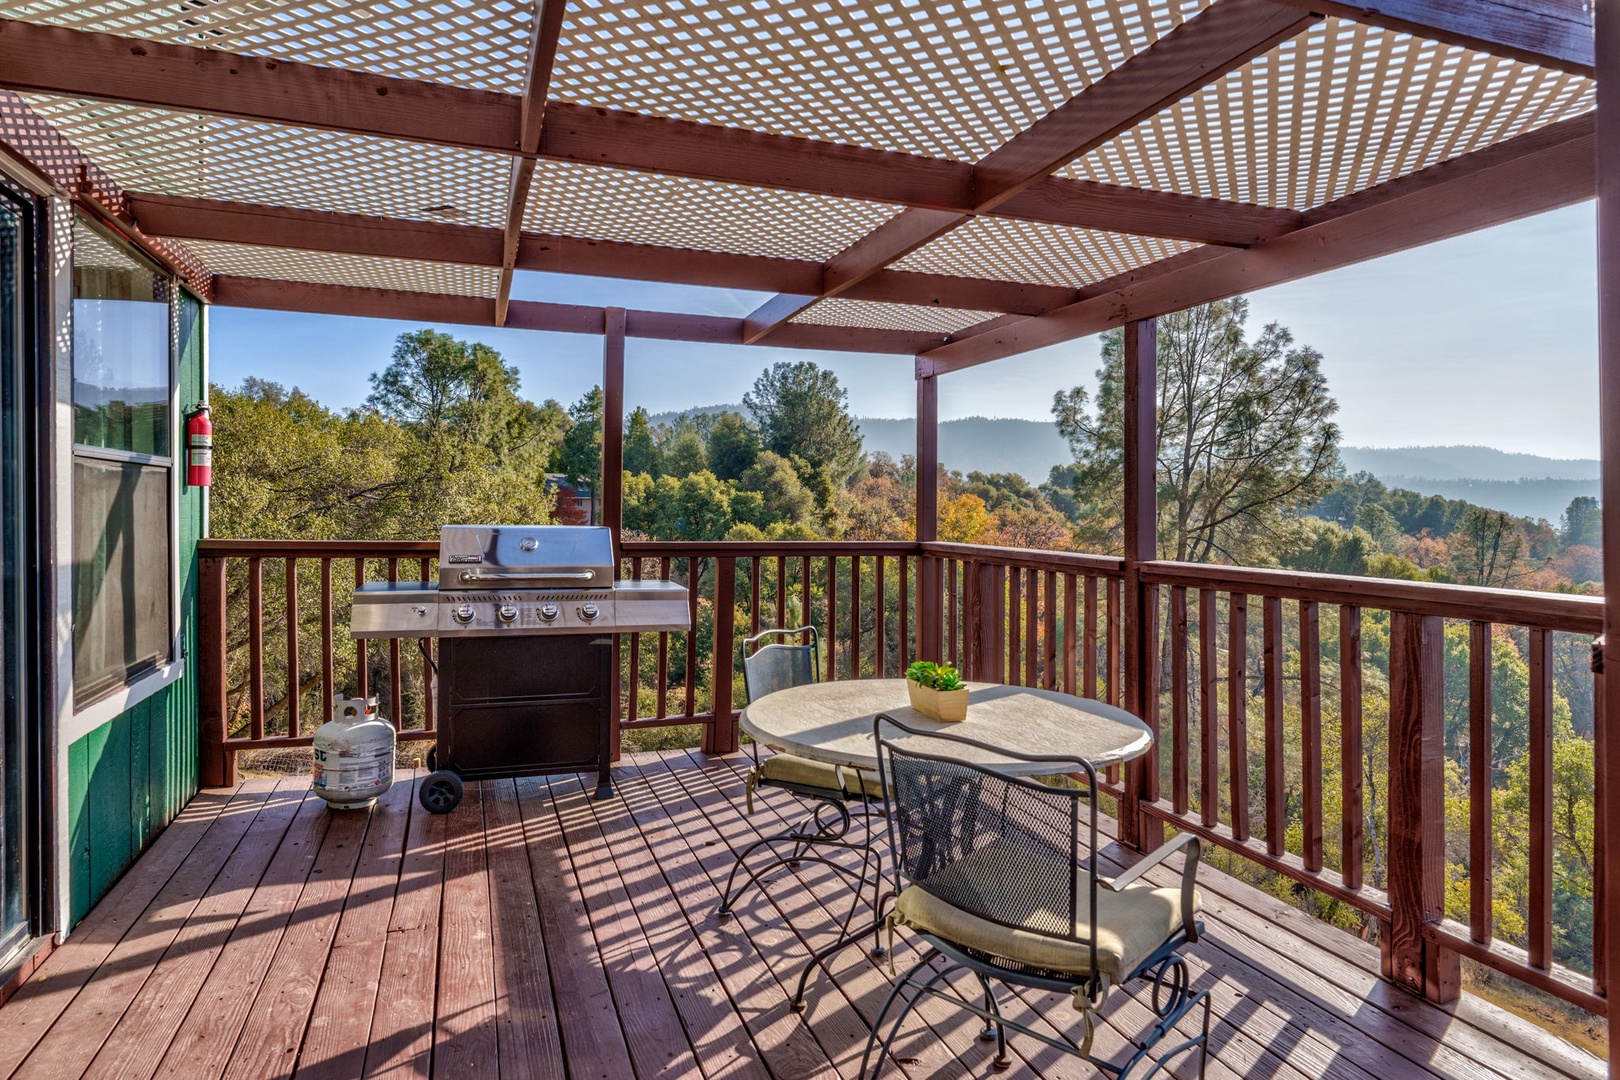 Outdoor grilling and dining will be a breeze on the Back Deck, with additional seating for morning coffee